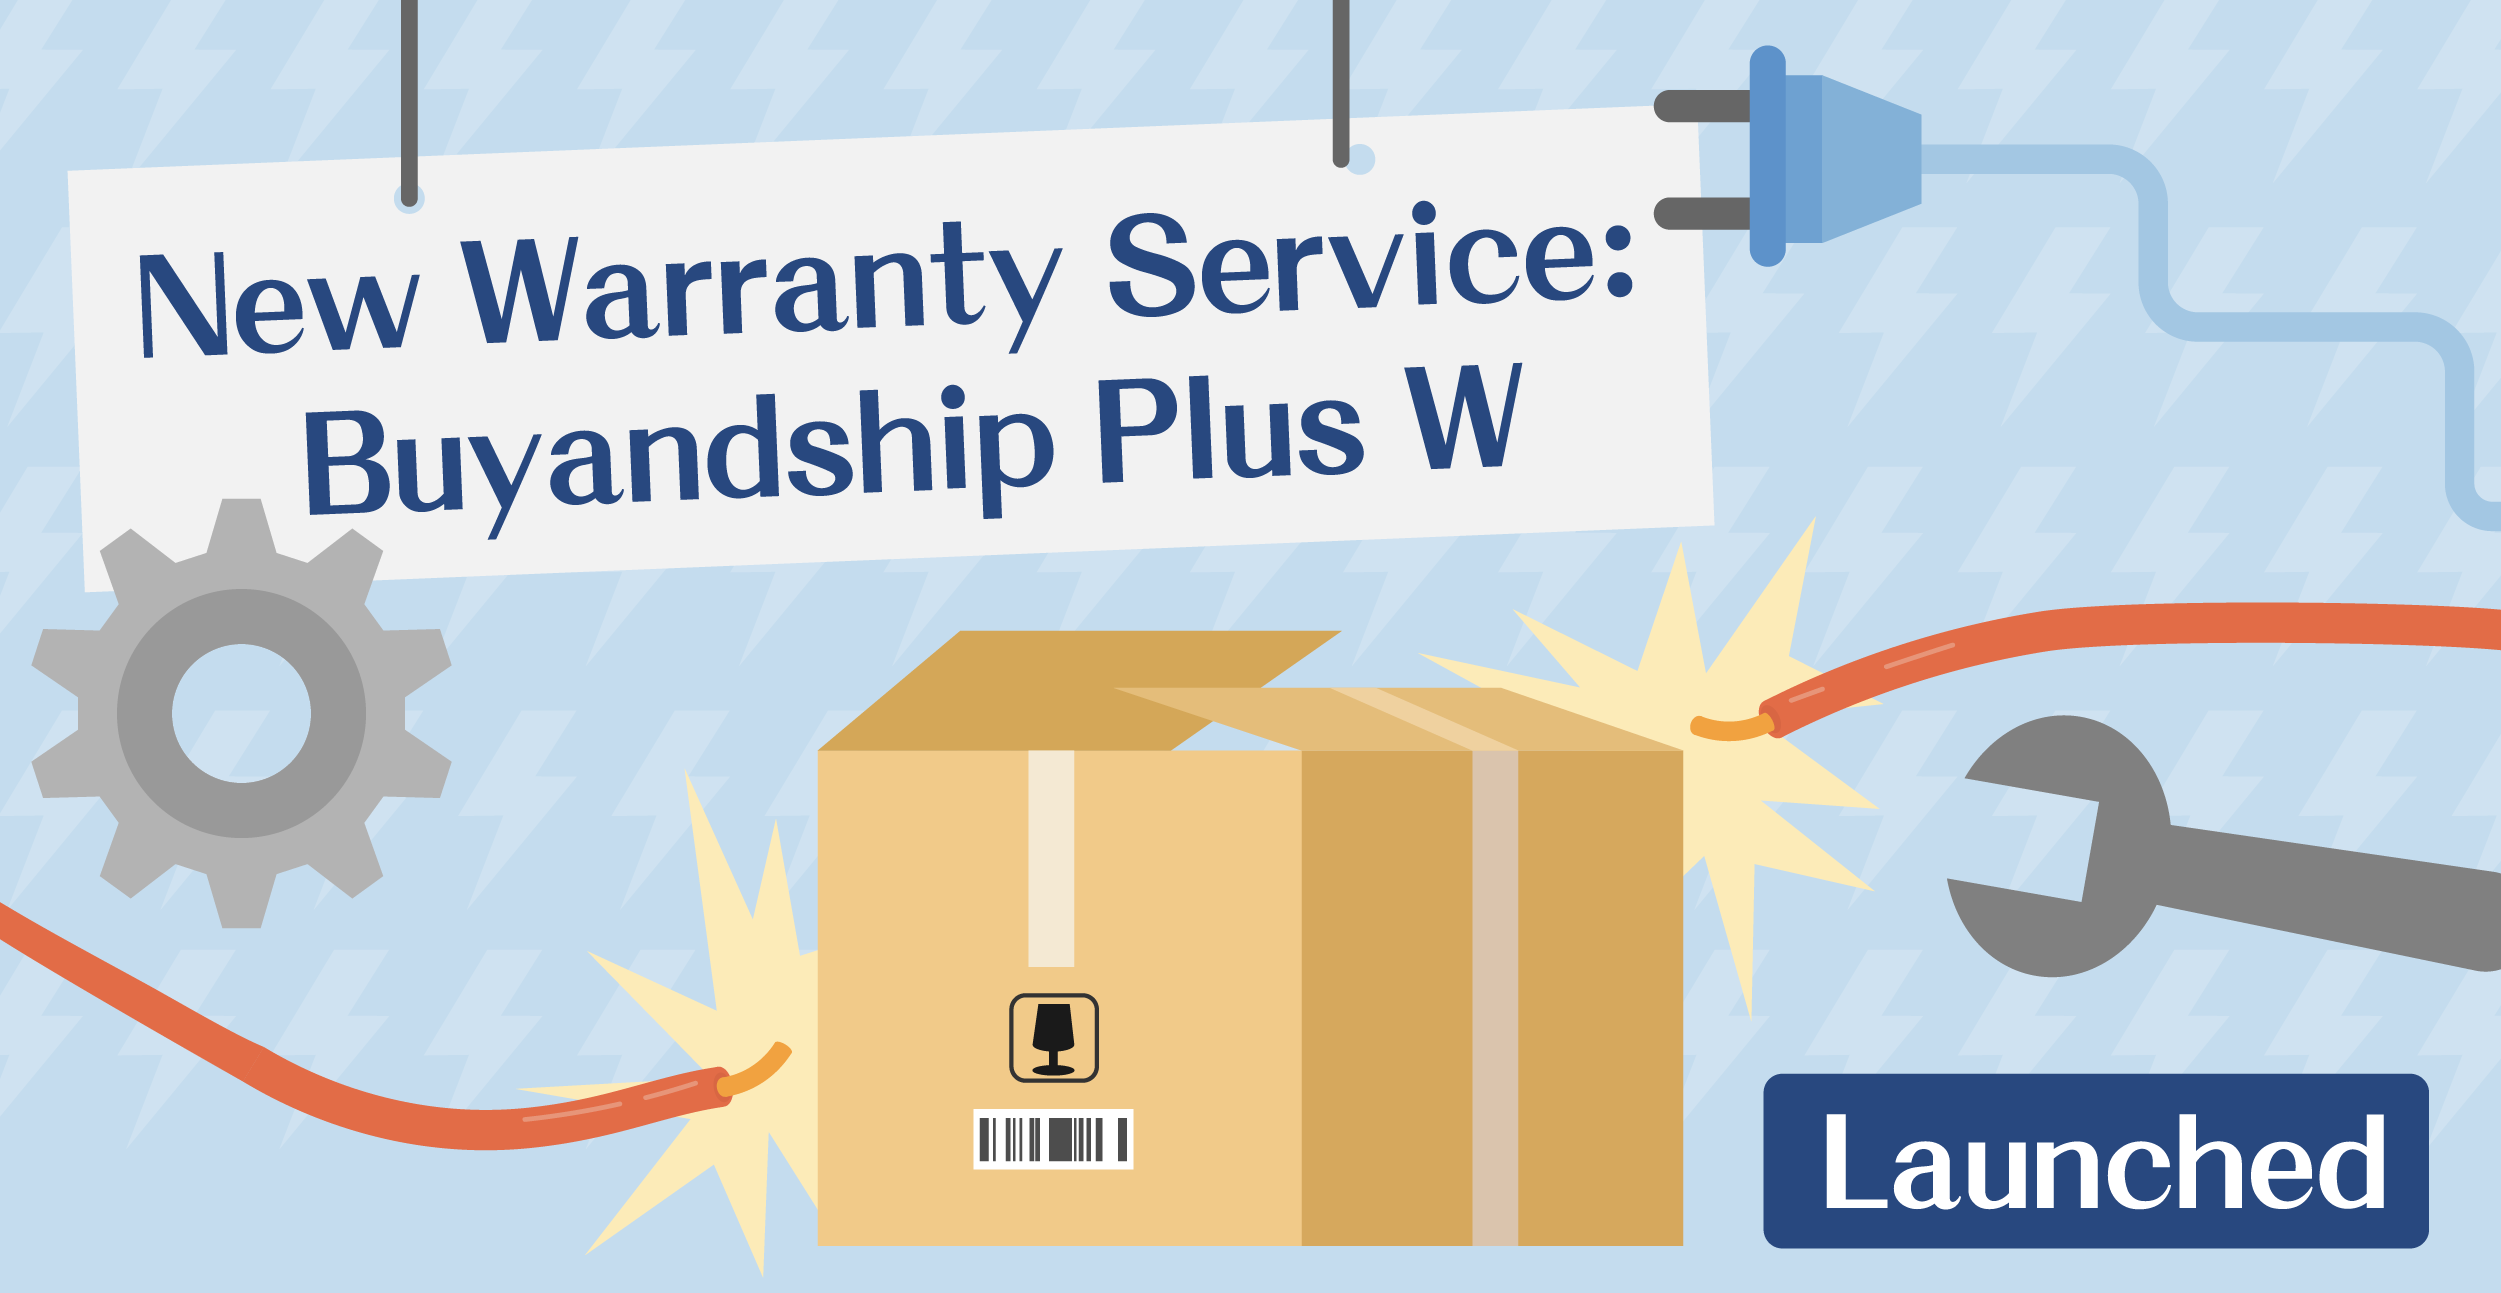 New Warranty Service: Buyandship Plus W Launched